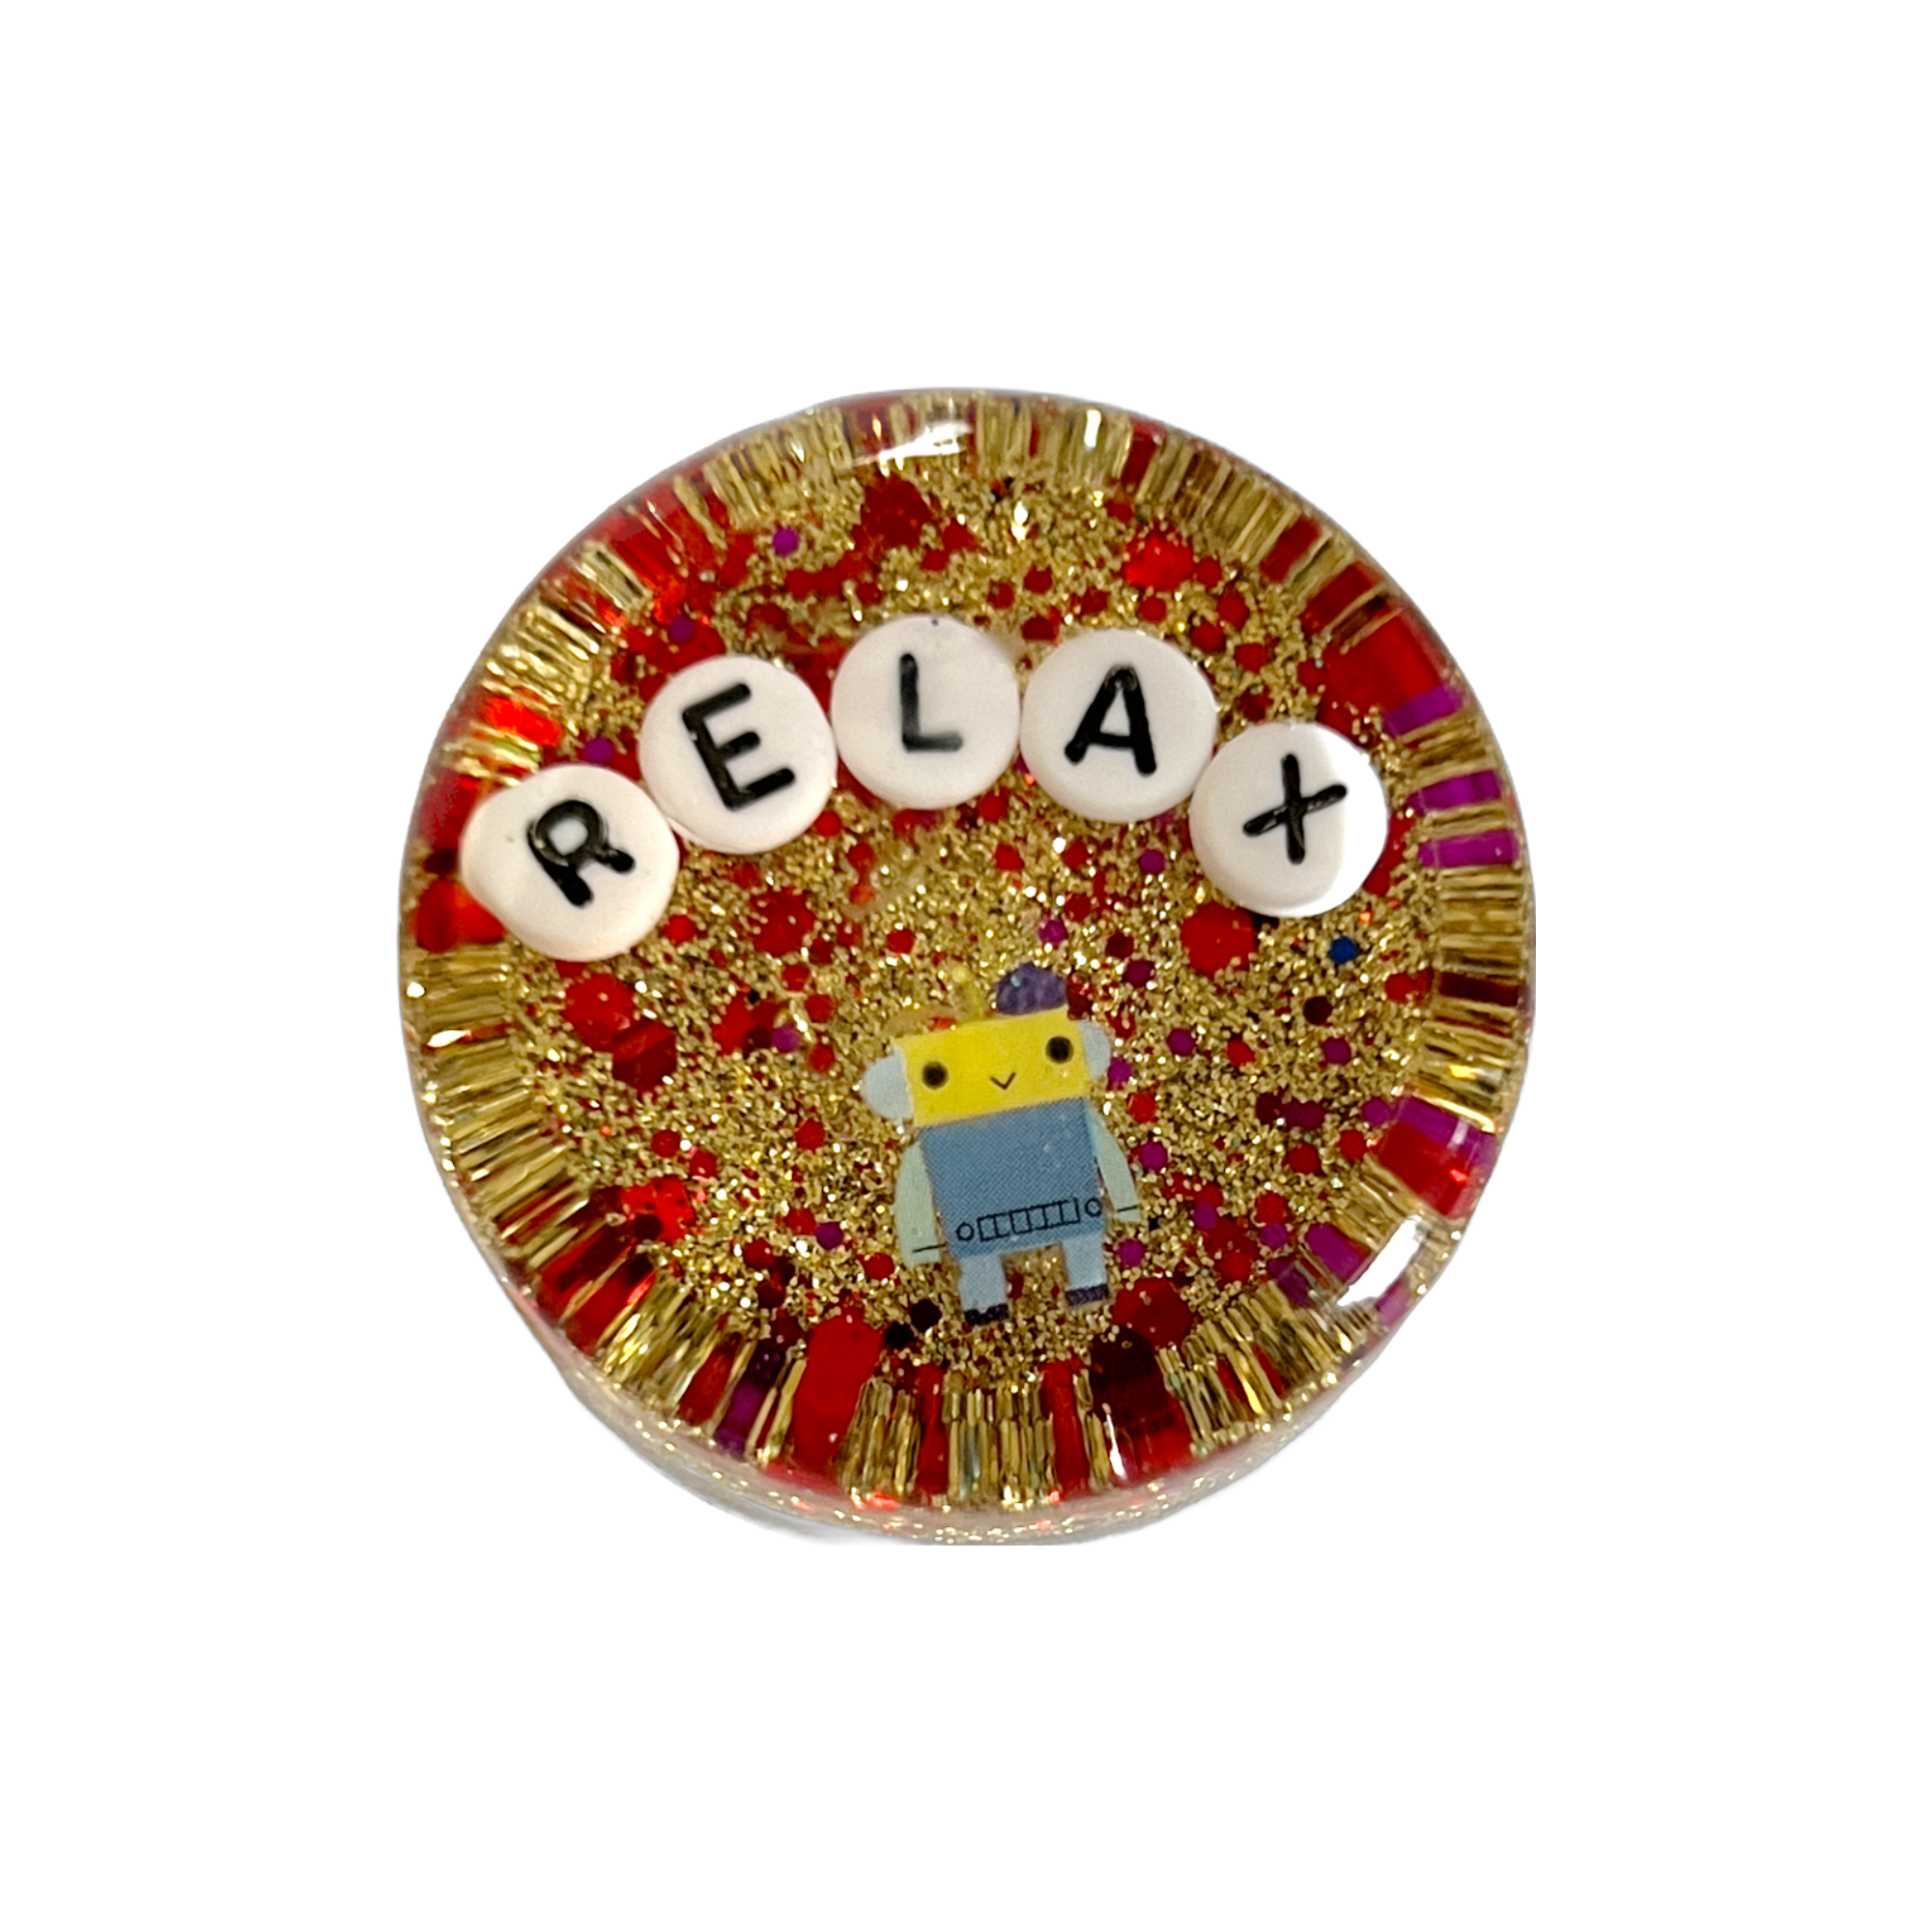 Relax - Shower Art - READY TO SHIP